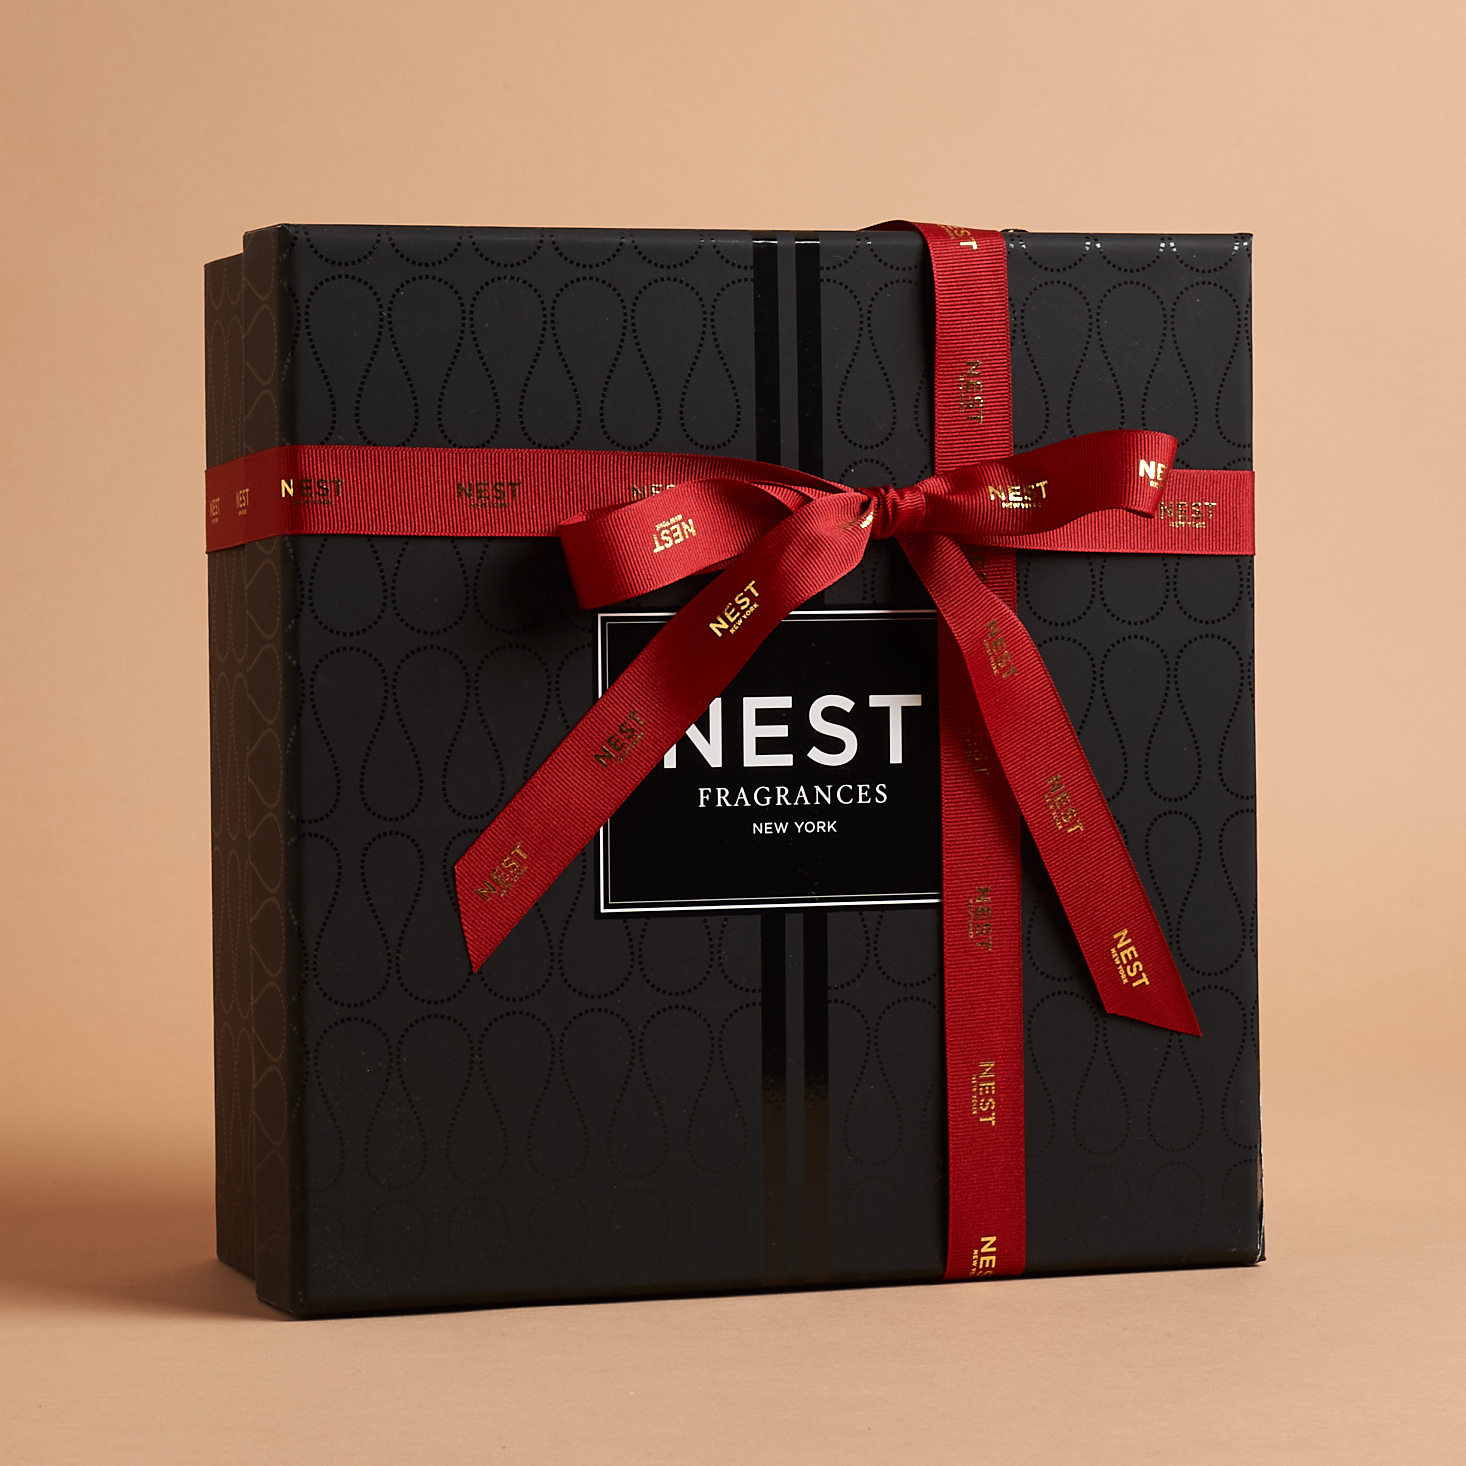 NEST Fragrances New York Cyber Monday Deal – 25% Off + Bonus Rollerball And Free Candle on $200+ Purchases!